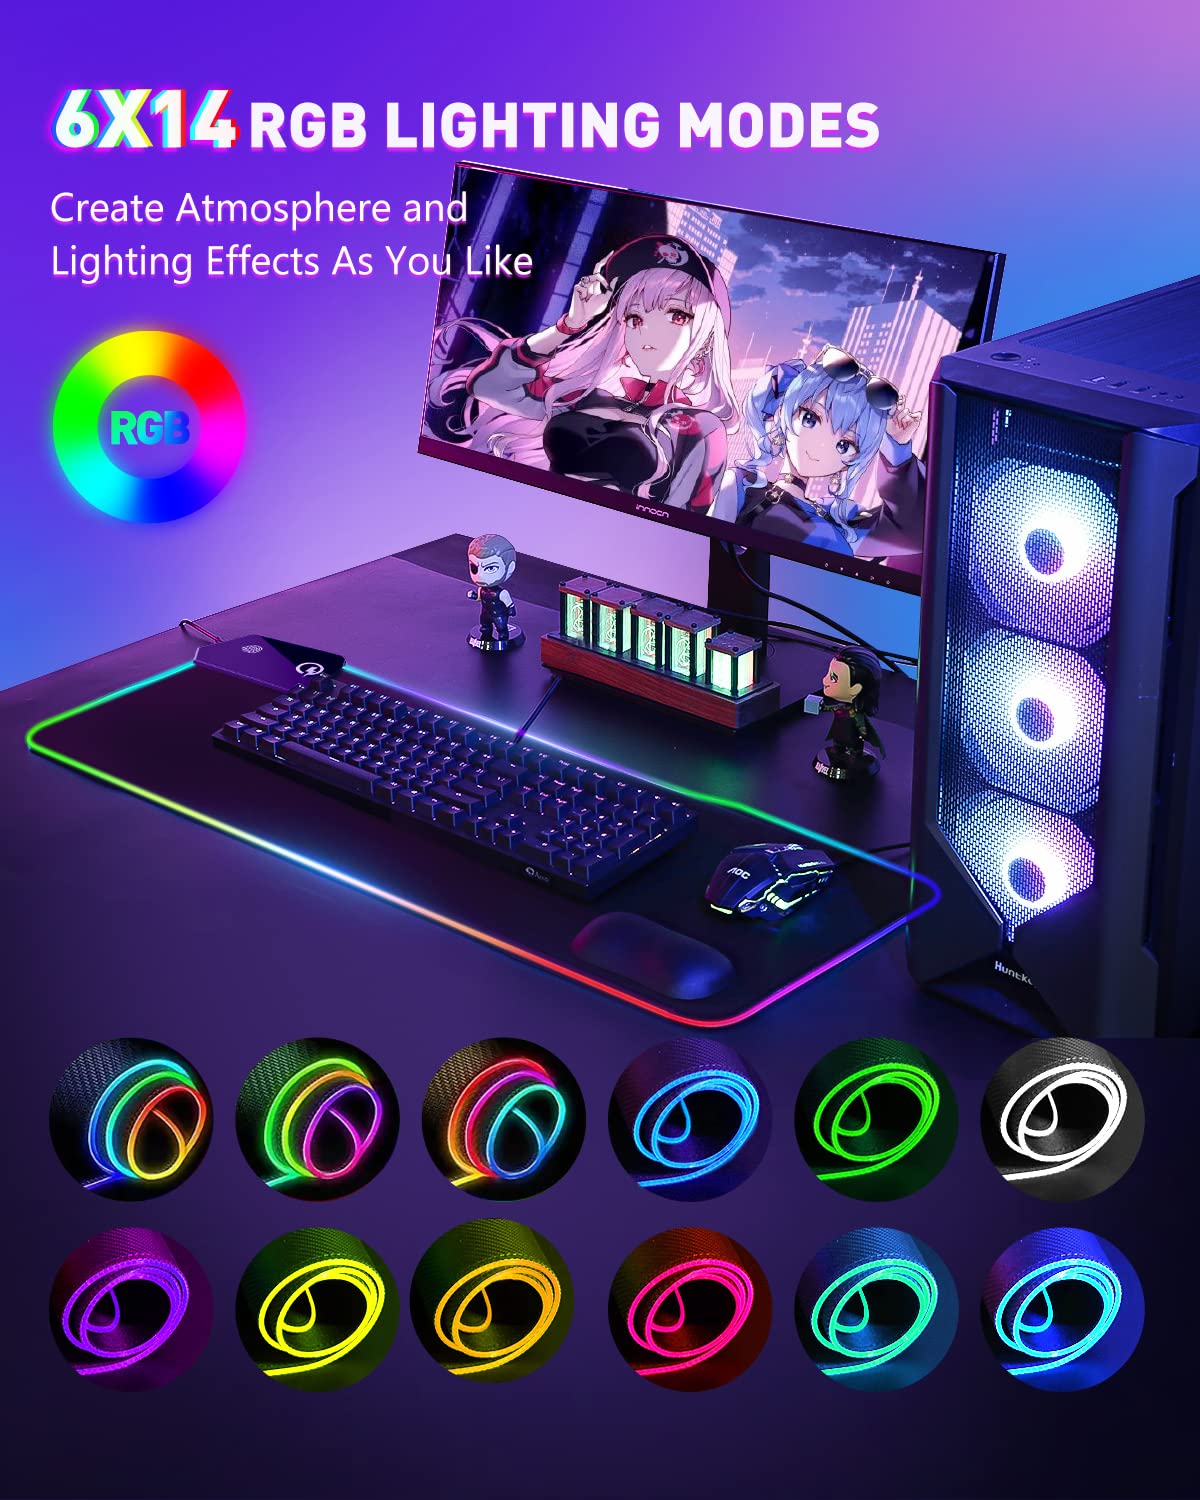 Gaming Mouse Pad with 15w Wireless Charging,14 Colors Led Light RGB PC Gaming Desk Mat,Ergonomic Large Mouse Pad Gaming,Mousepad with Wrist Support - amzGamess